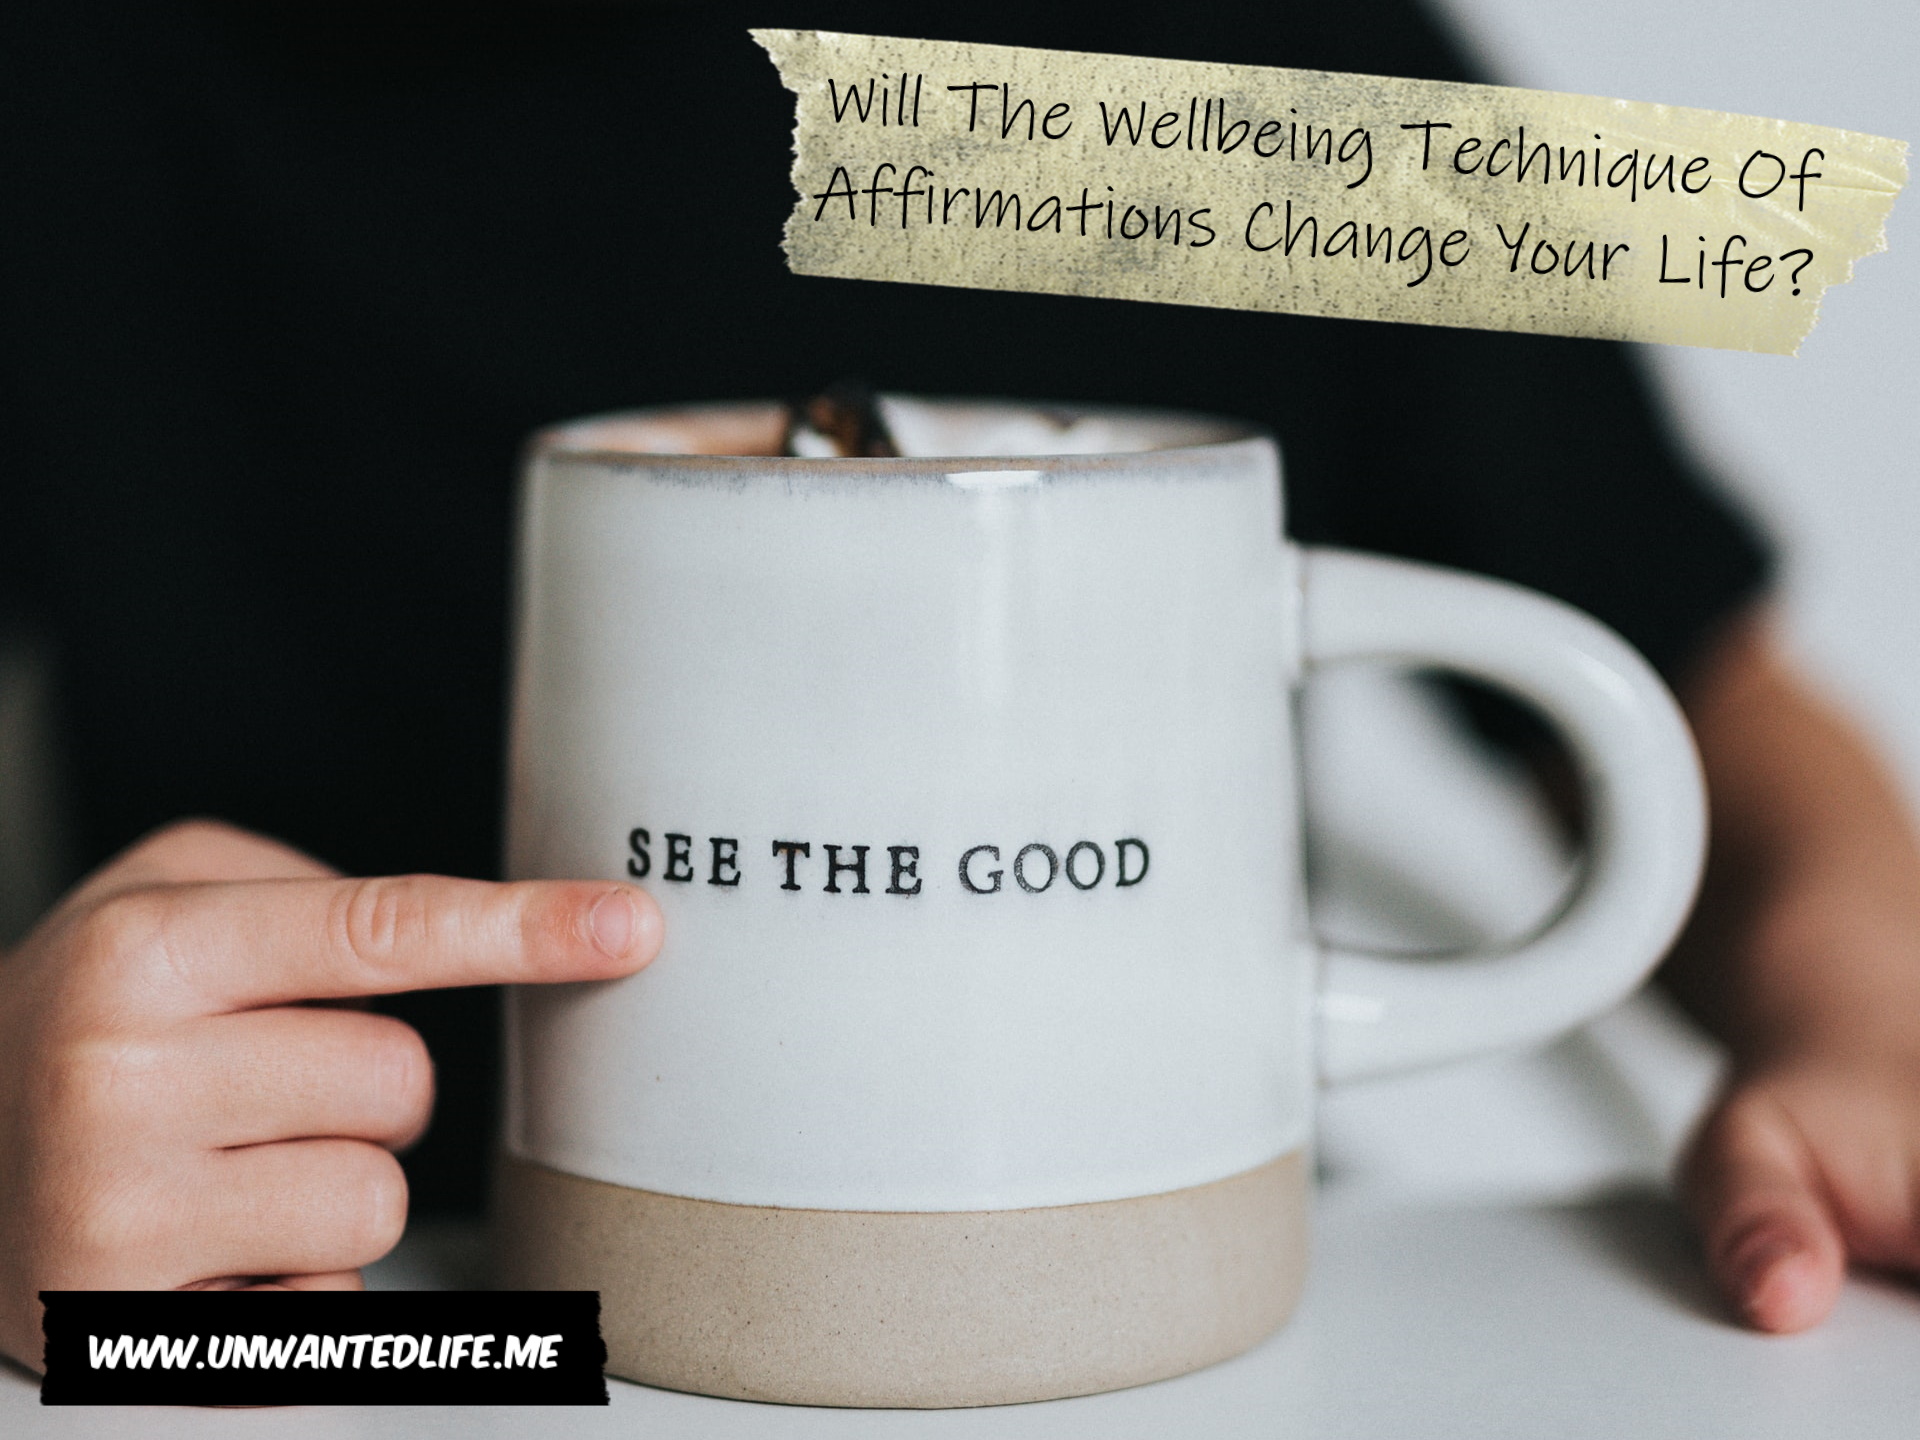 A photo of a child's hand pointing at some writing on a mug that says "see the good" to represent the topic of the article - Will The Wellbeing Technique Of Affirmations Change Your Life?